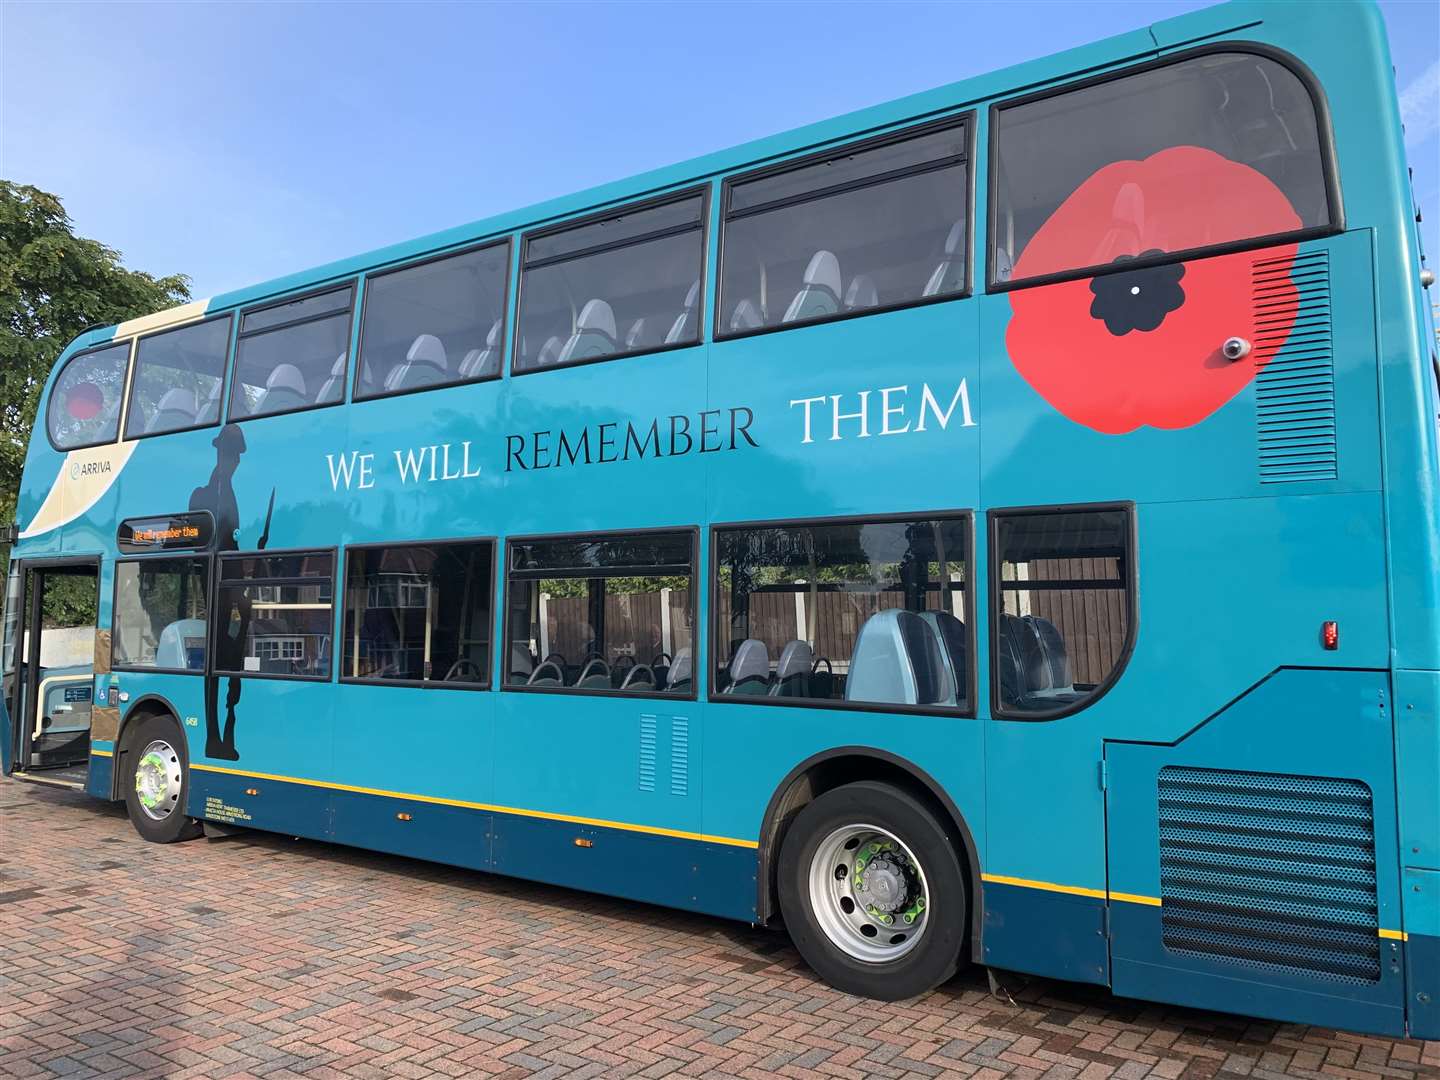 Arriva is allowing the Armed Forces to travel free on Sunday